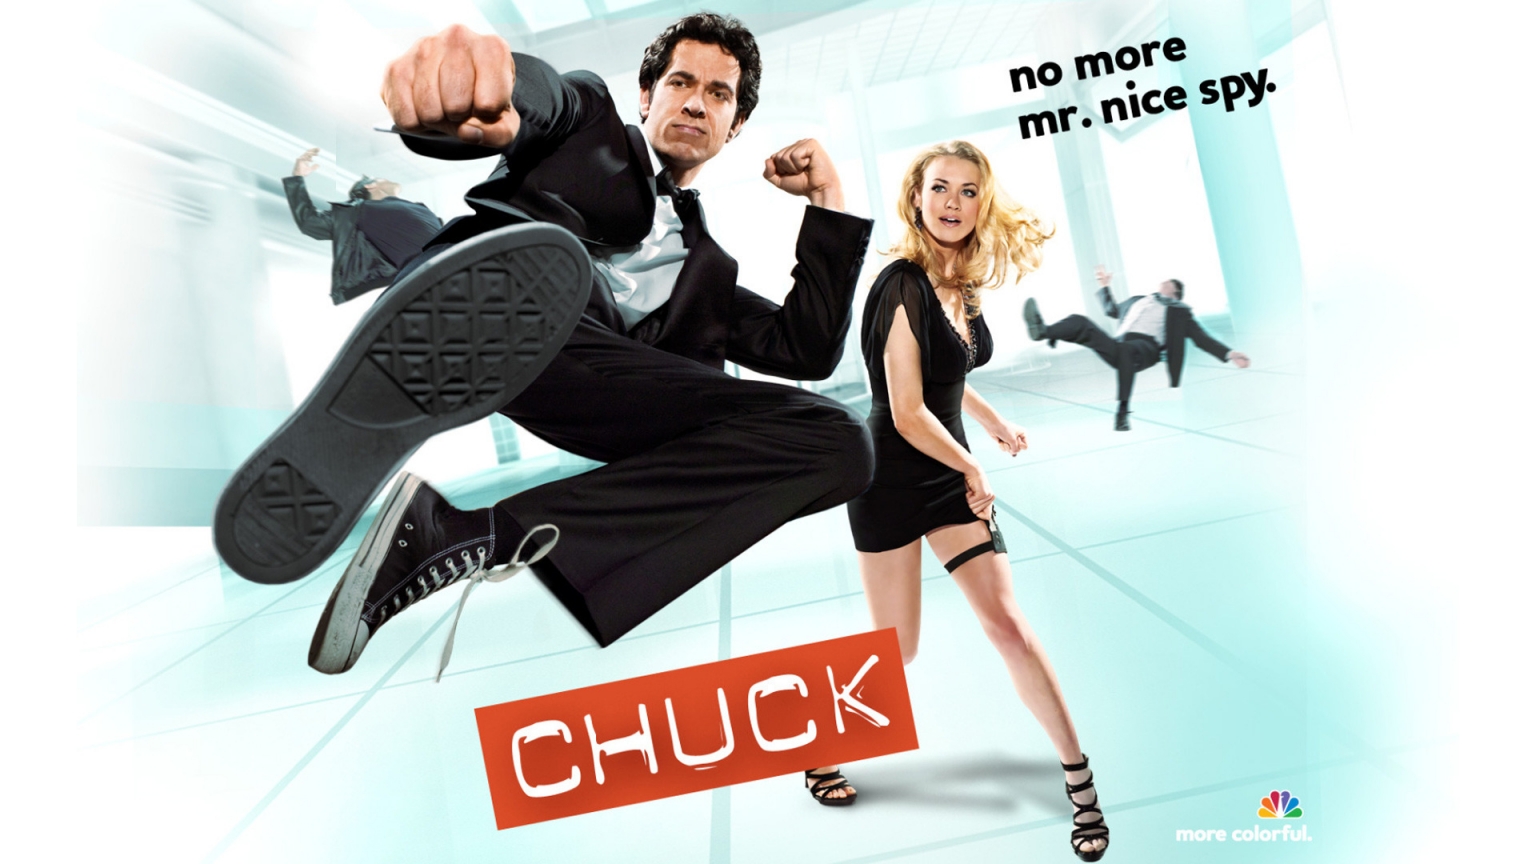 Kung Fu Chuck for 1536 x 864 HDTV resolution